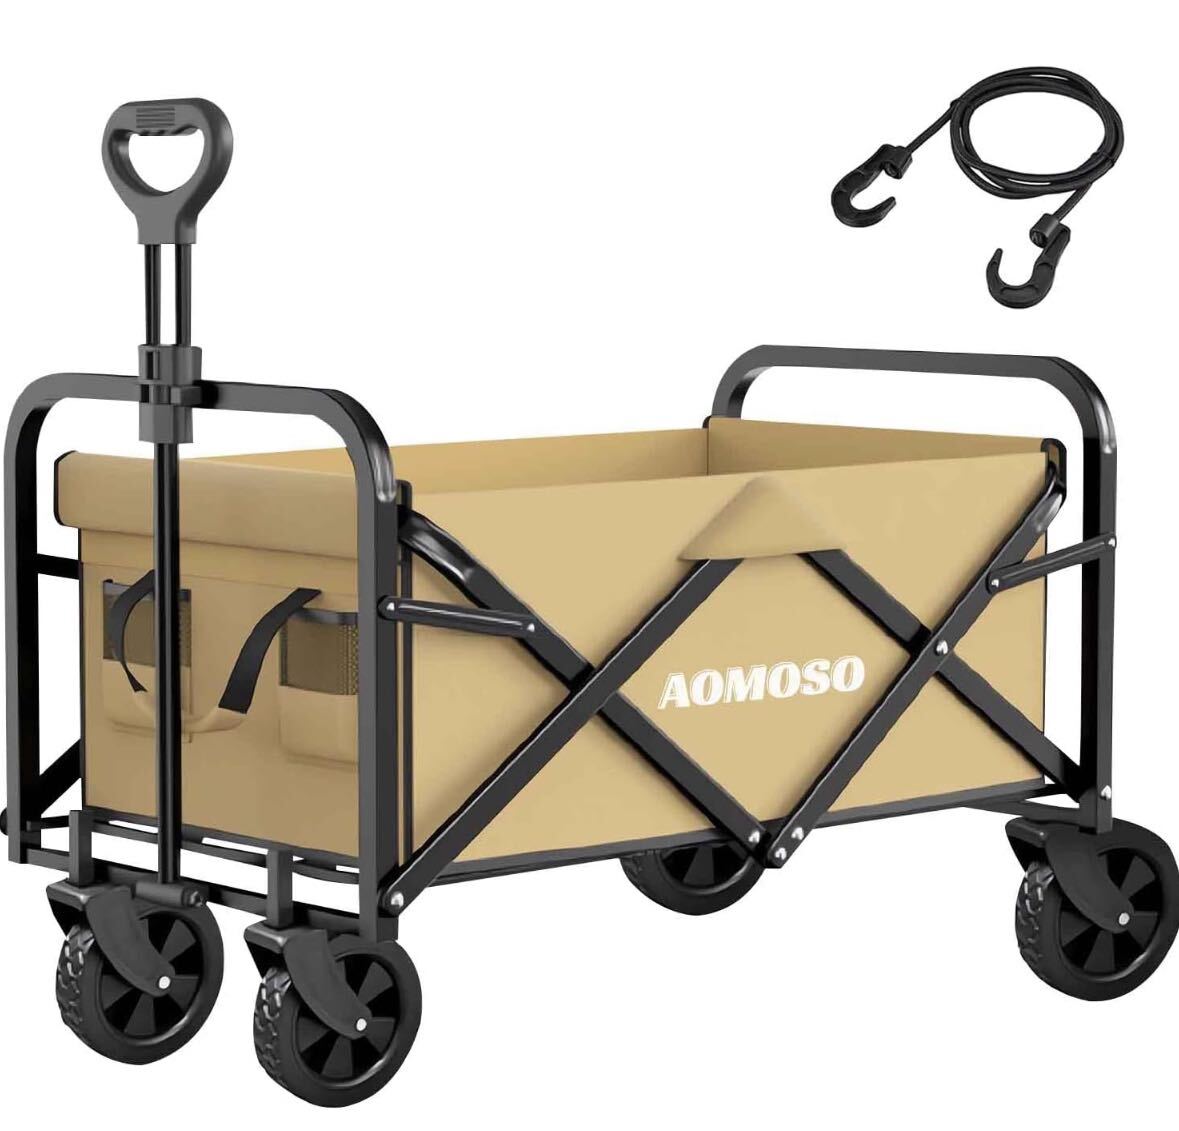  carry wagon folding type carry cart outdoor carry wagon light weight high capacity 100L withstand load 100kg storage pocket attaching compact,